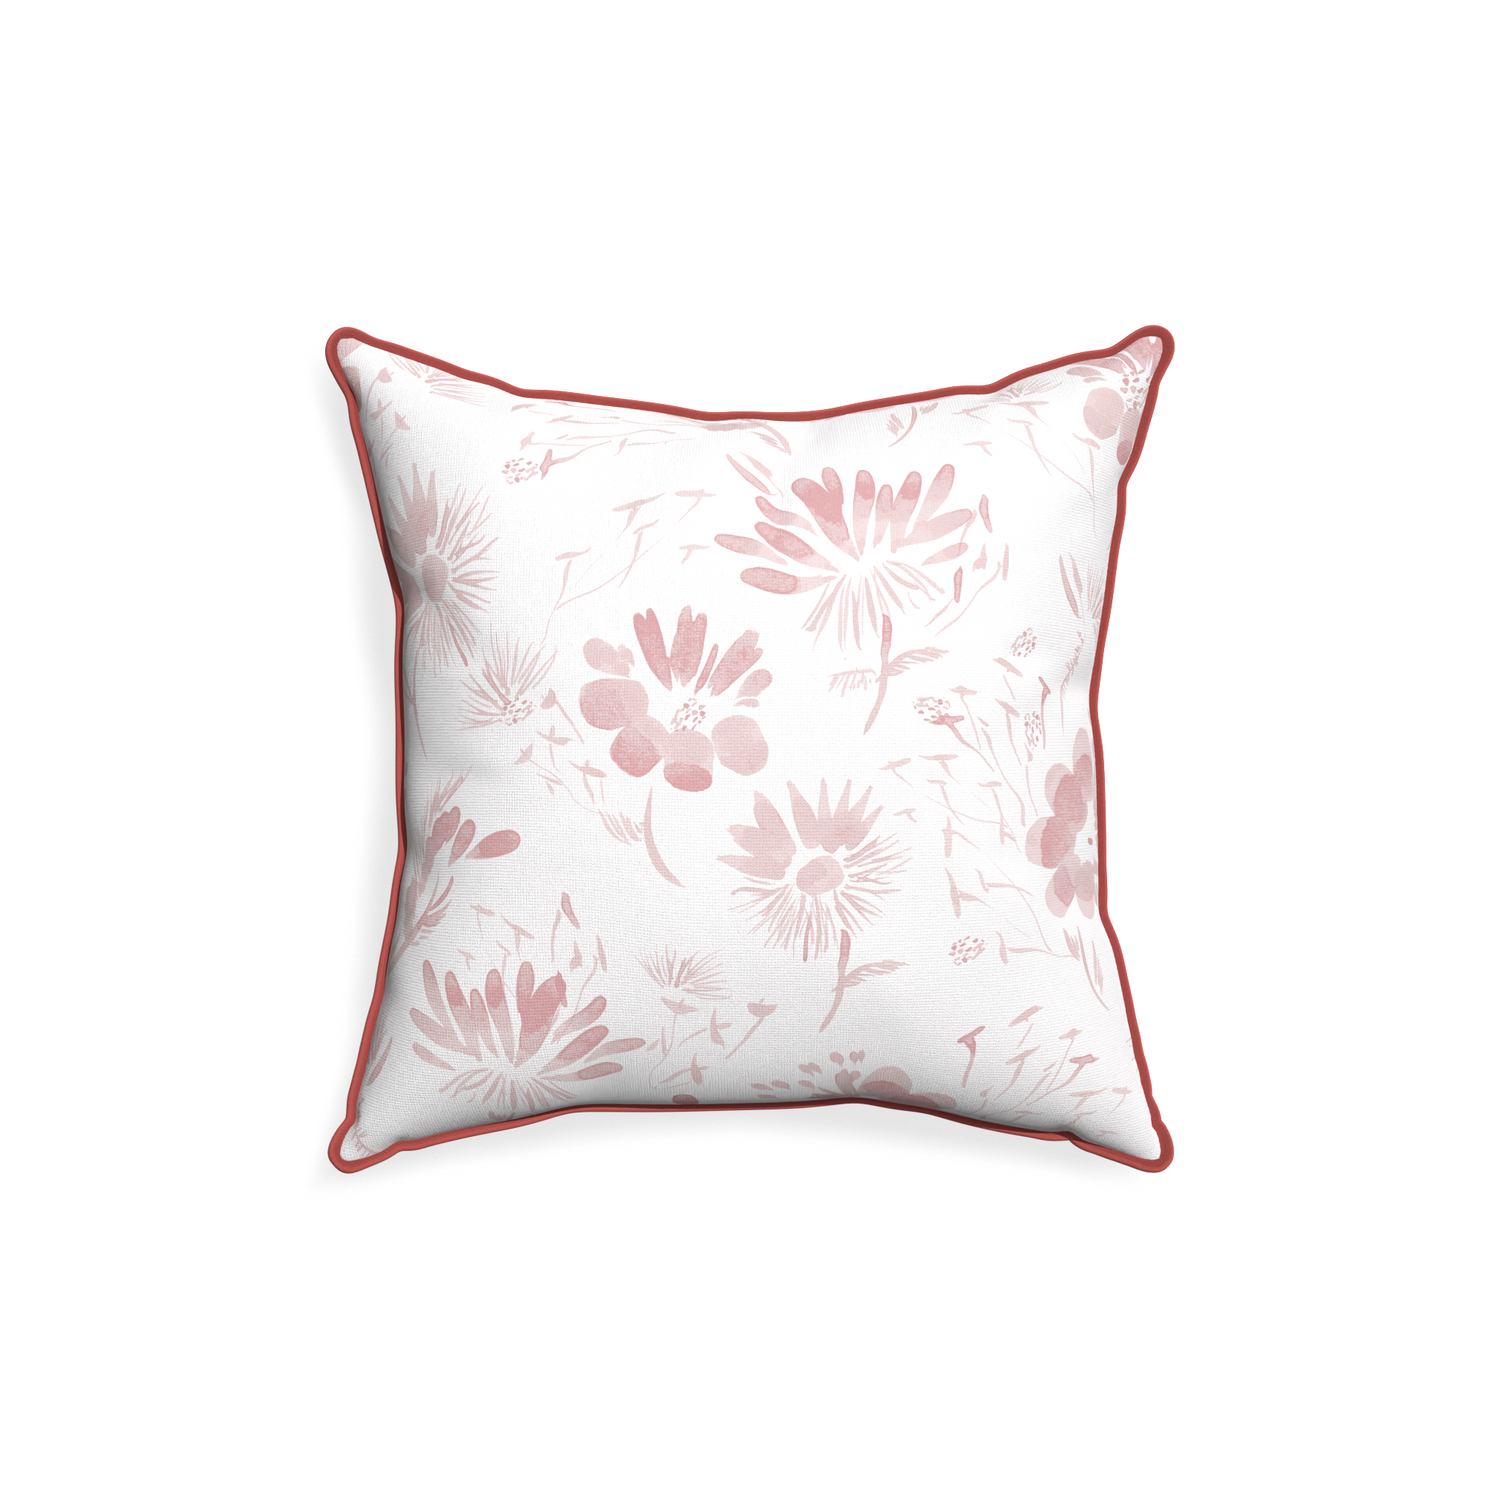 18-square blake custom pink floralpillow with c piping on white background